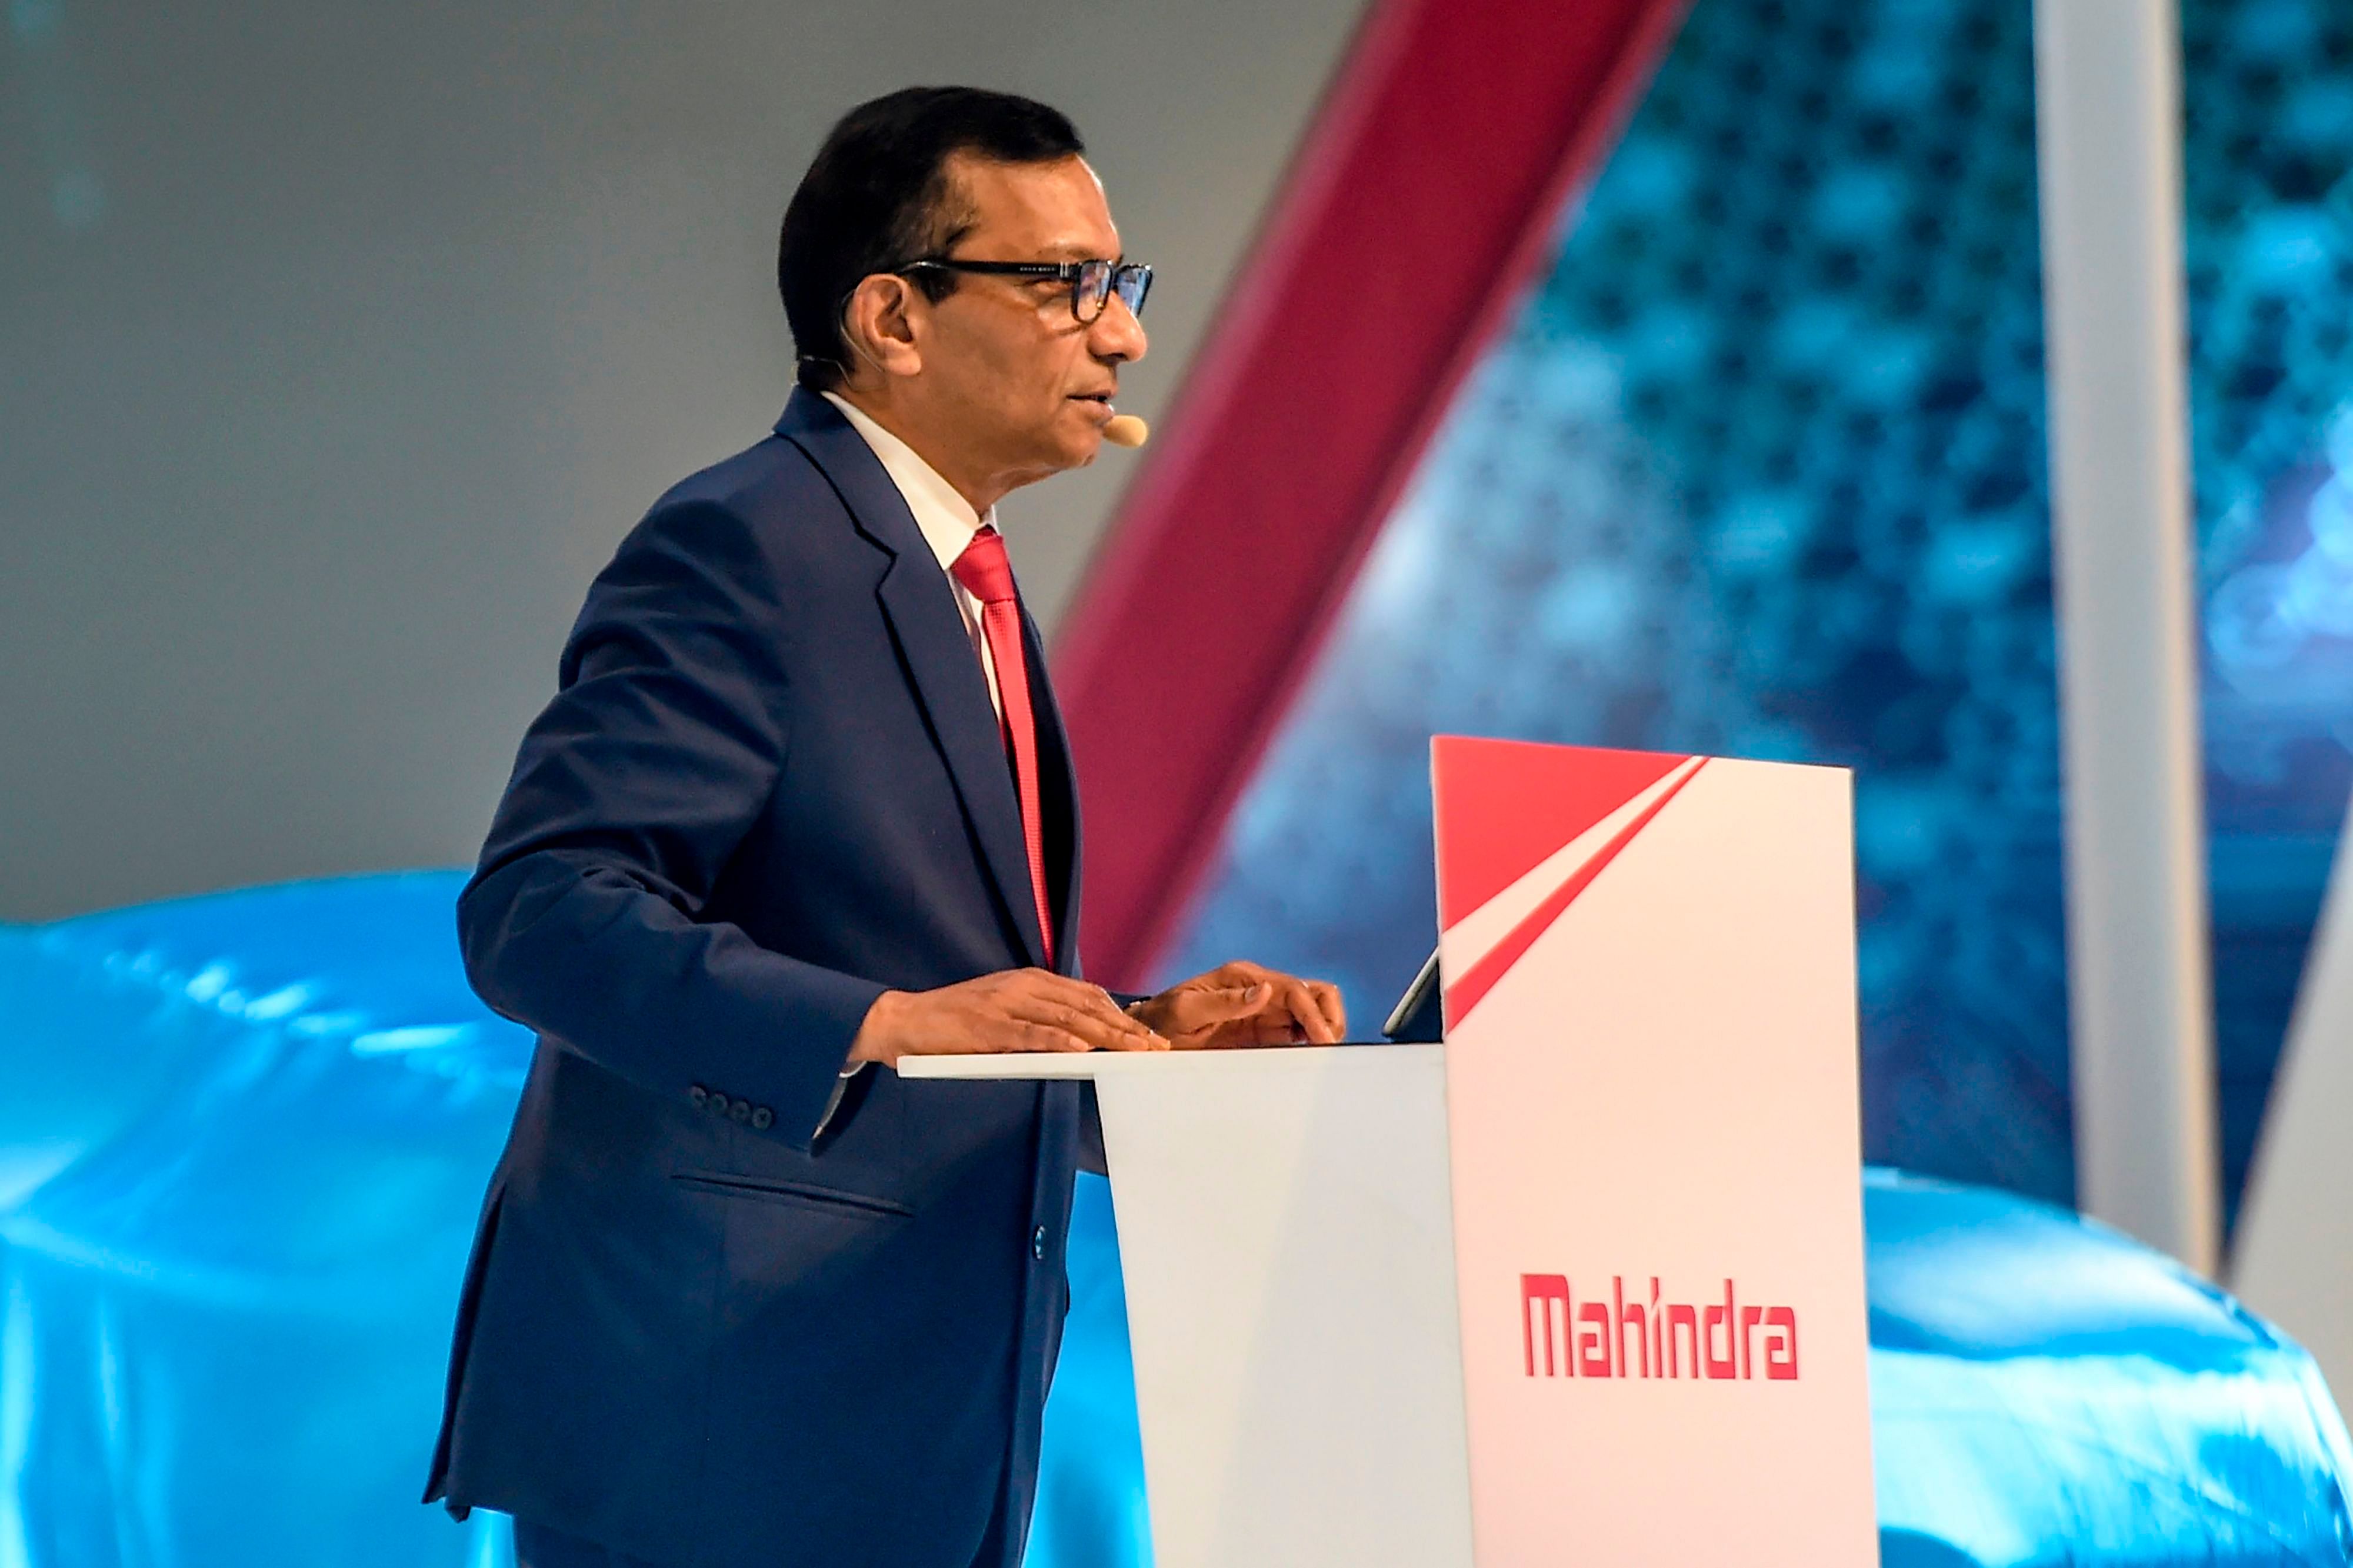 Managing Director (MD) of Mahindra and Mahindra Limited, Pawan Goenka, speaks at the Auto Expo 2020 at Greater Noida on the outskirts of New Delhi. (AFP Photo)